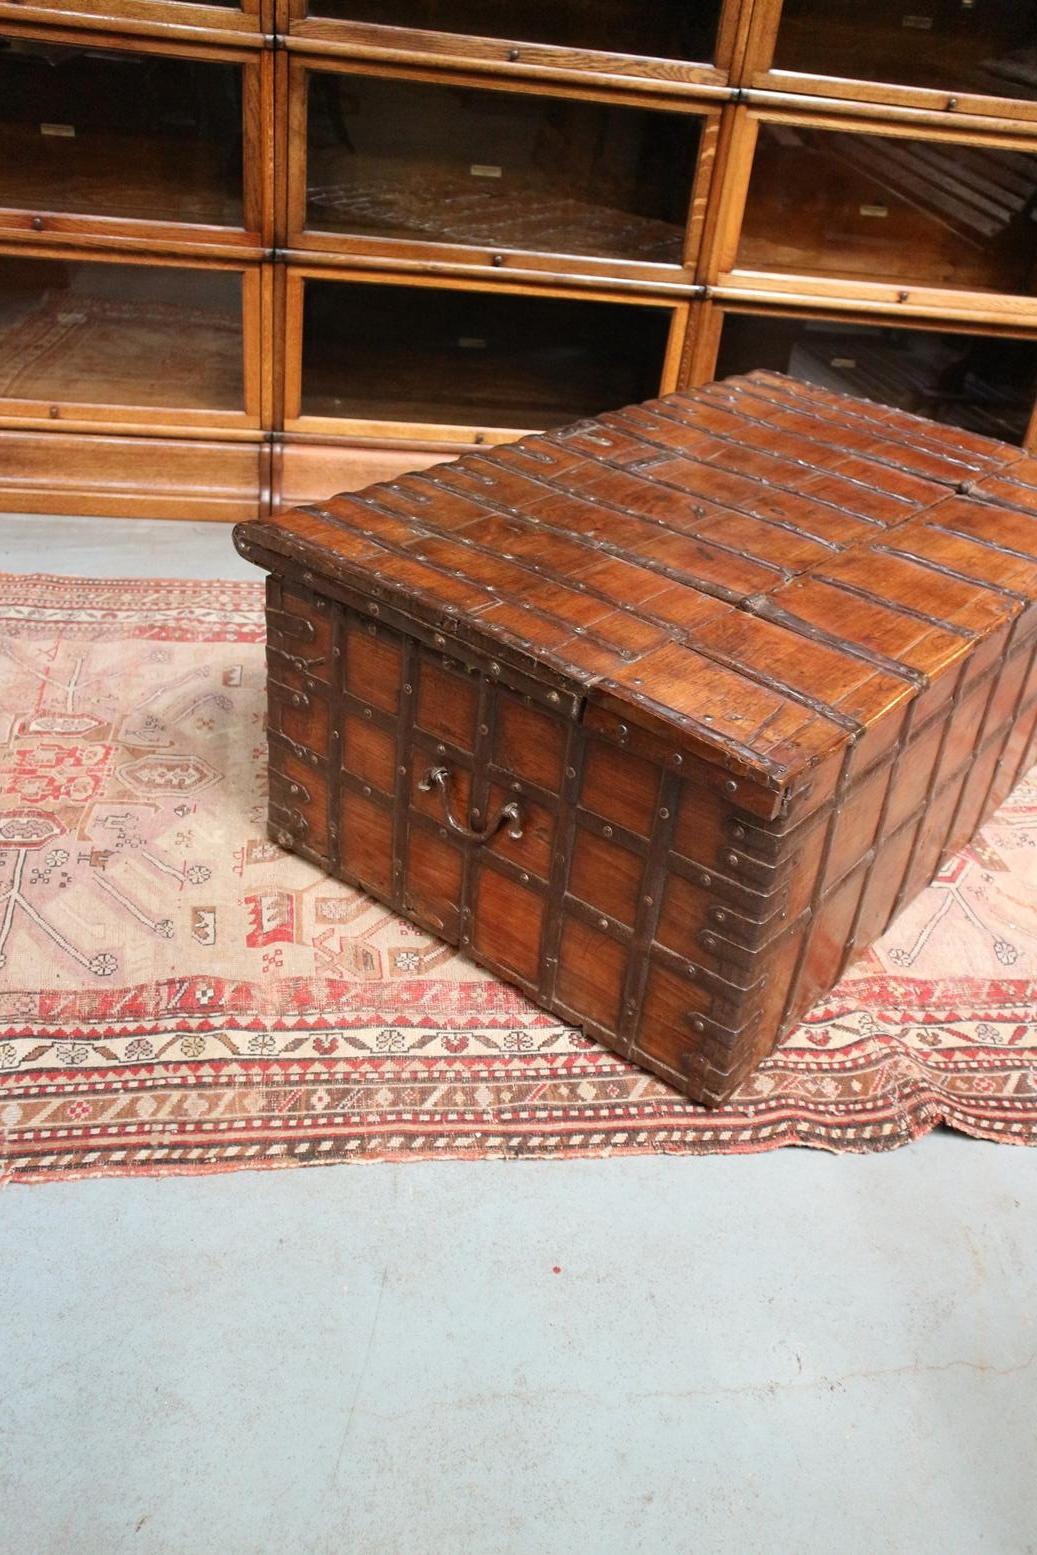 British Indian Ocean Territory 19th Century Anglo-Indian Teakwood Box or Coffee Table